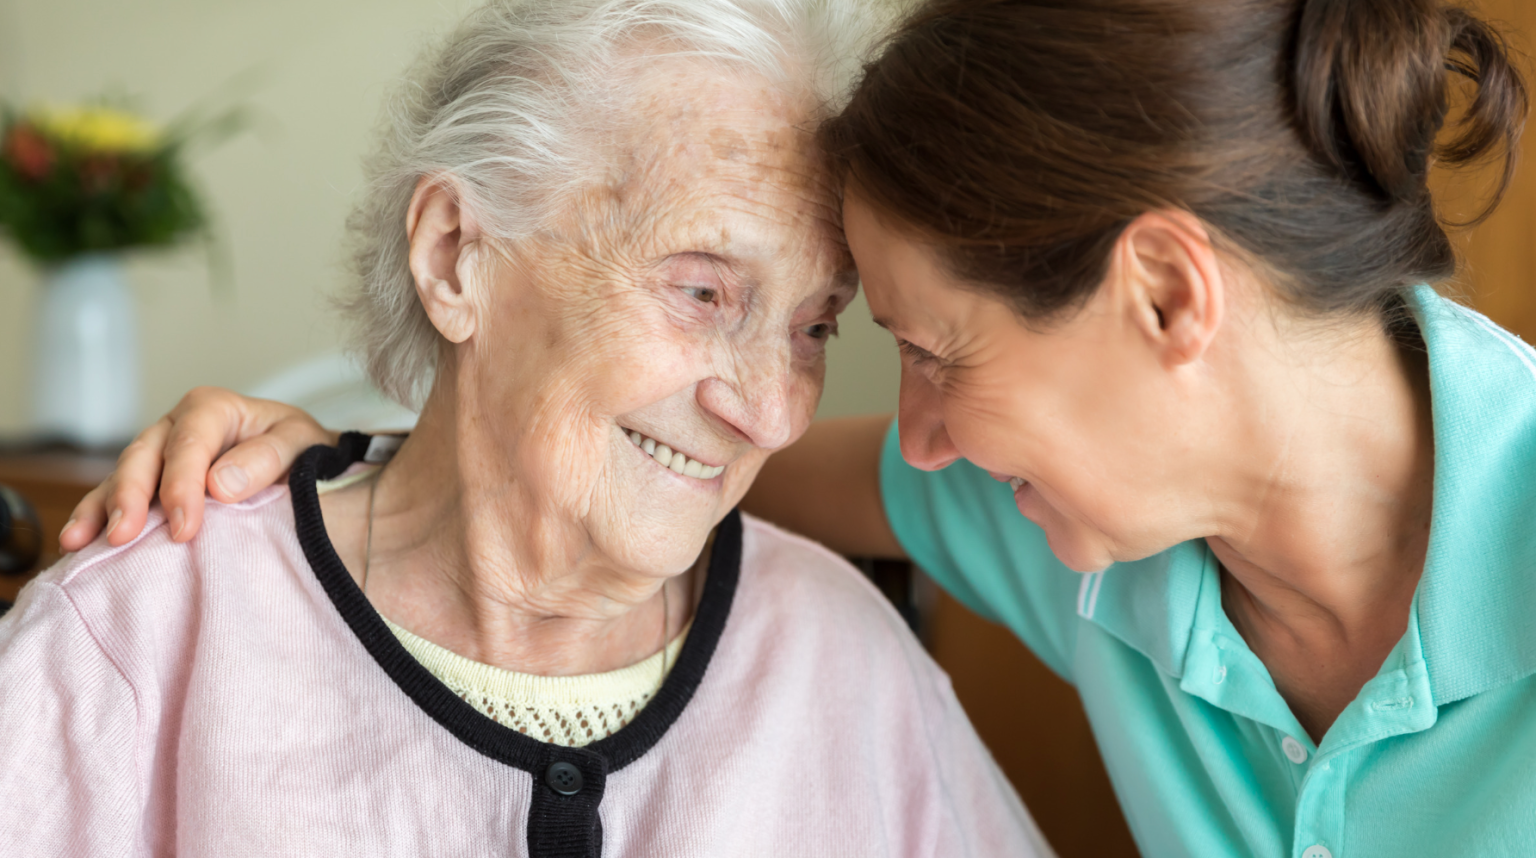 A woman comforting an elderly woman with Alzheimer’s Disease